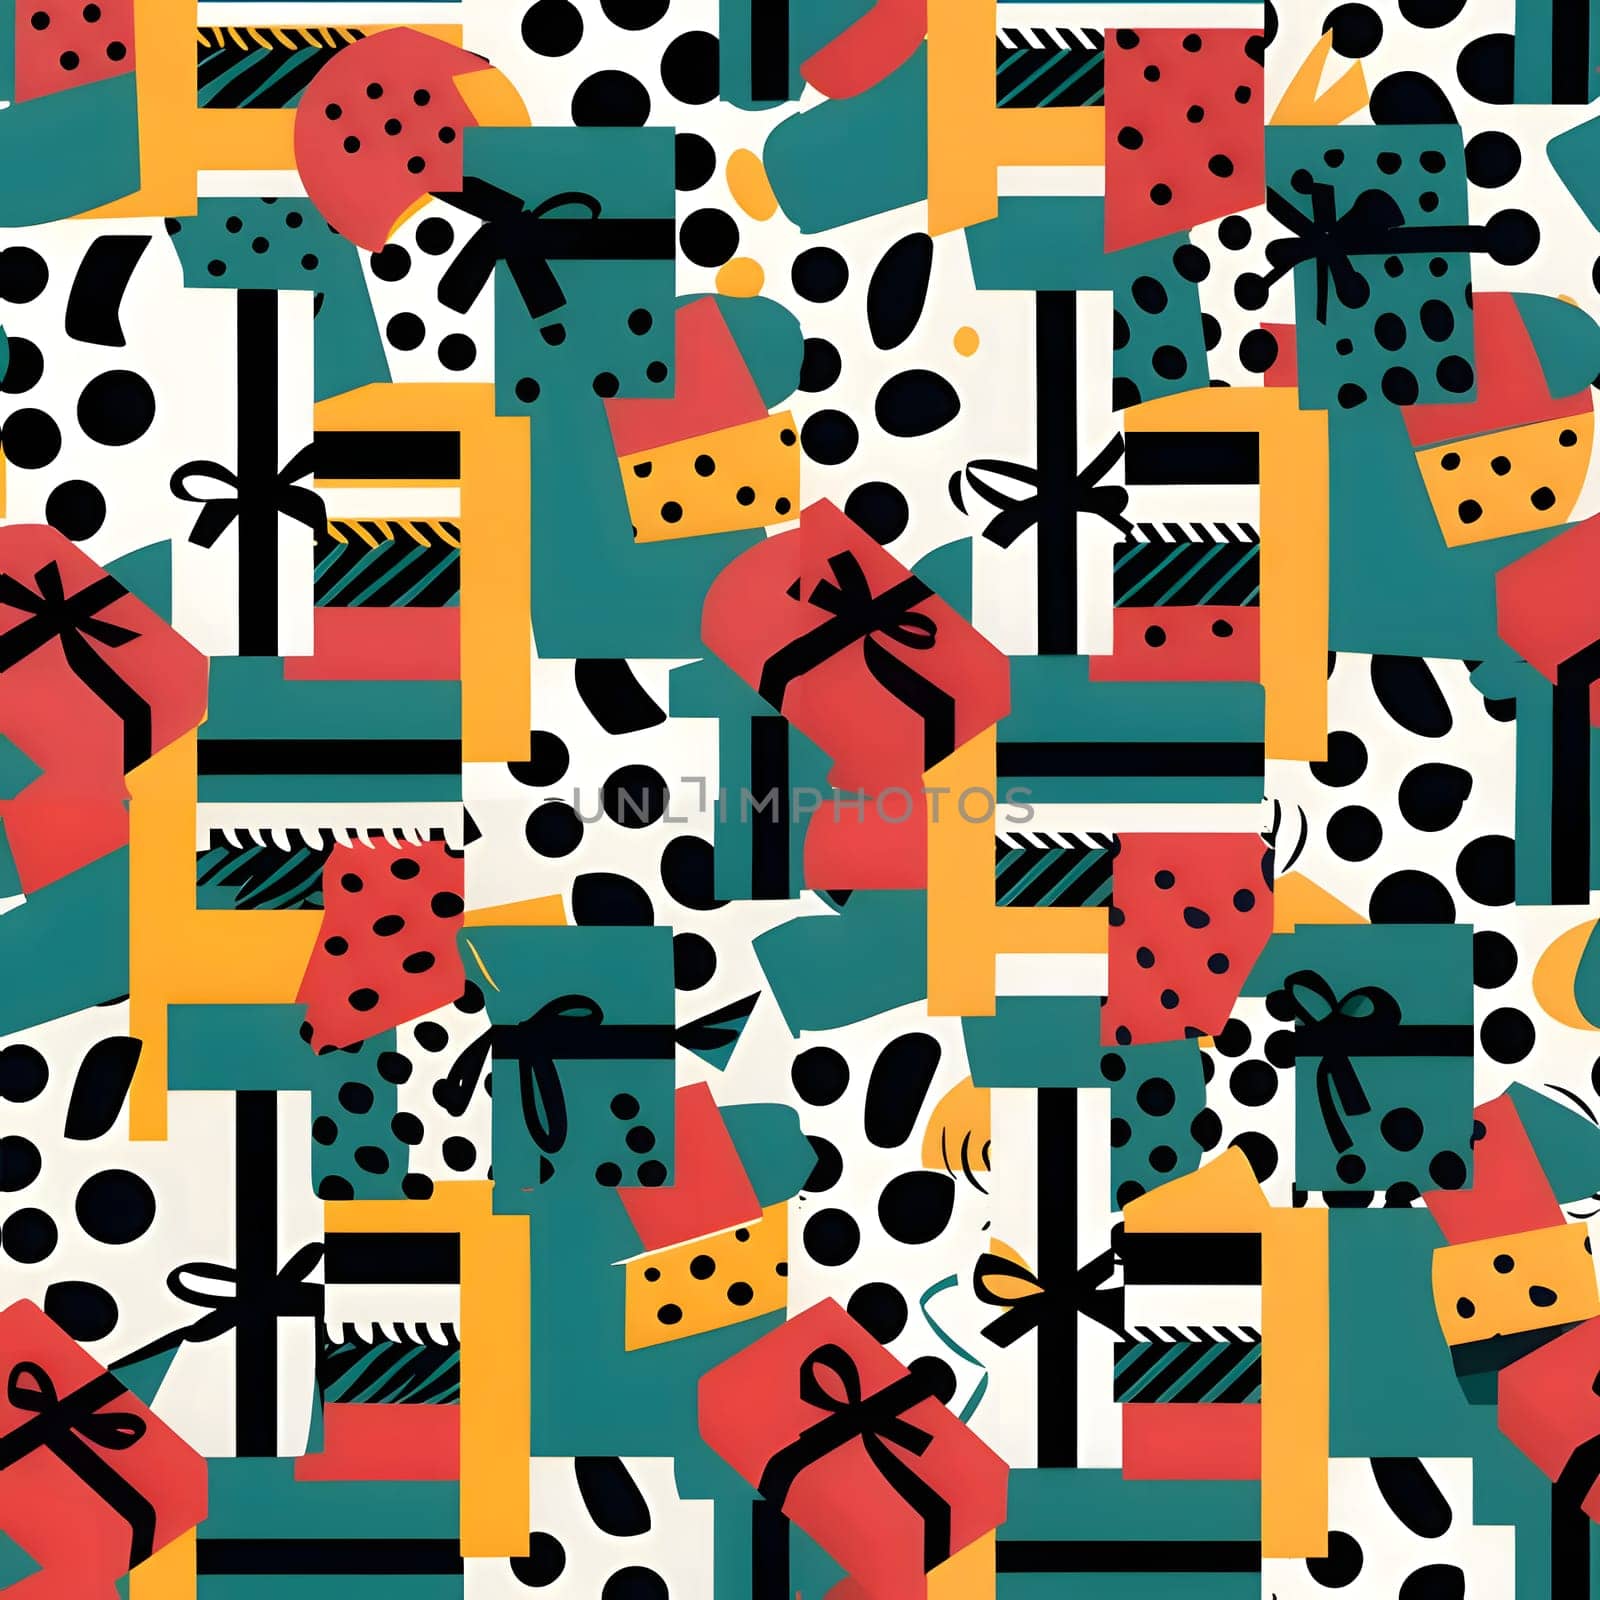 Patterns and banners backgrounds: Seamless pattern with gift boxes and polka dots. Vector illustration.